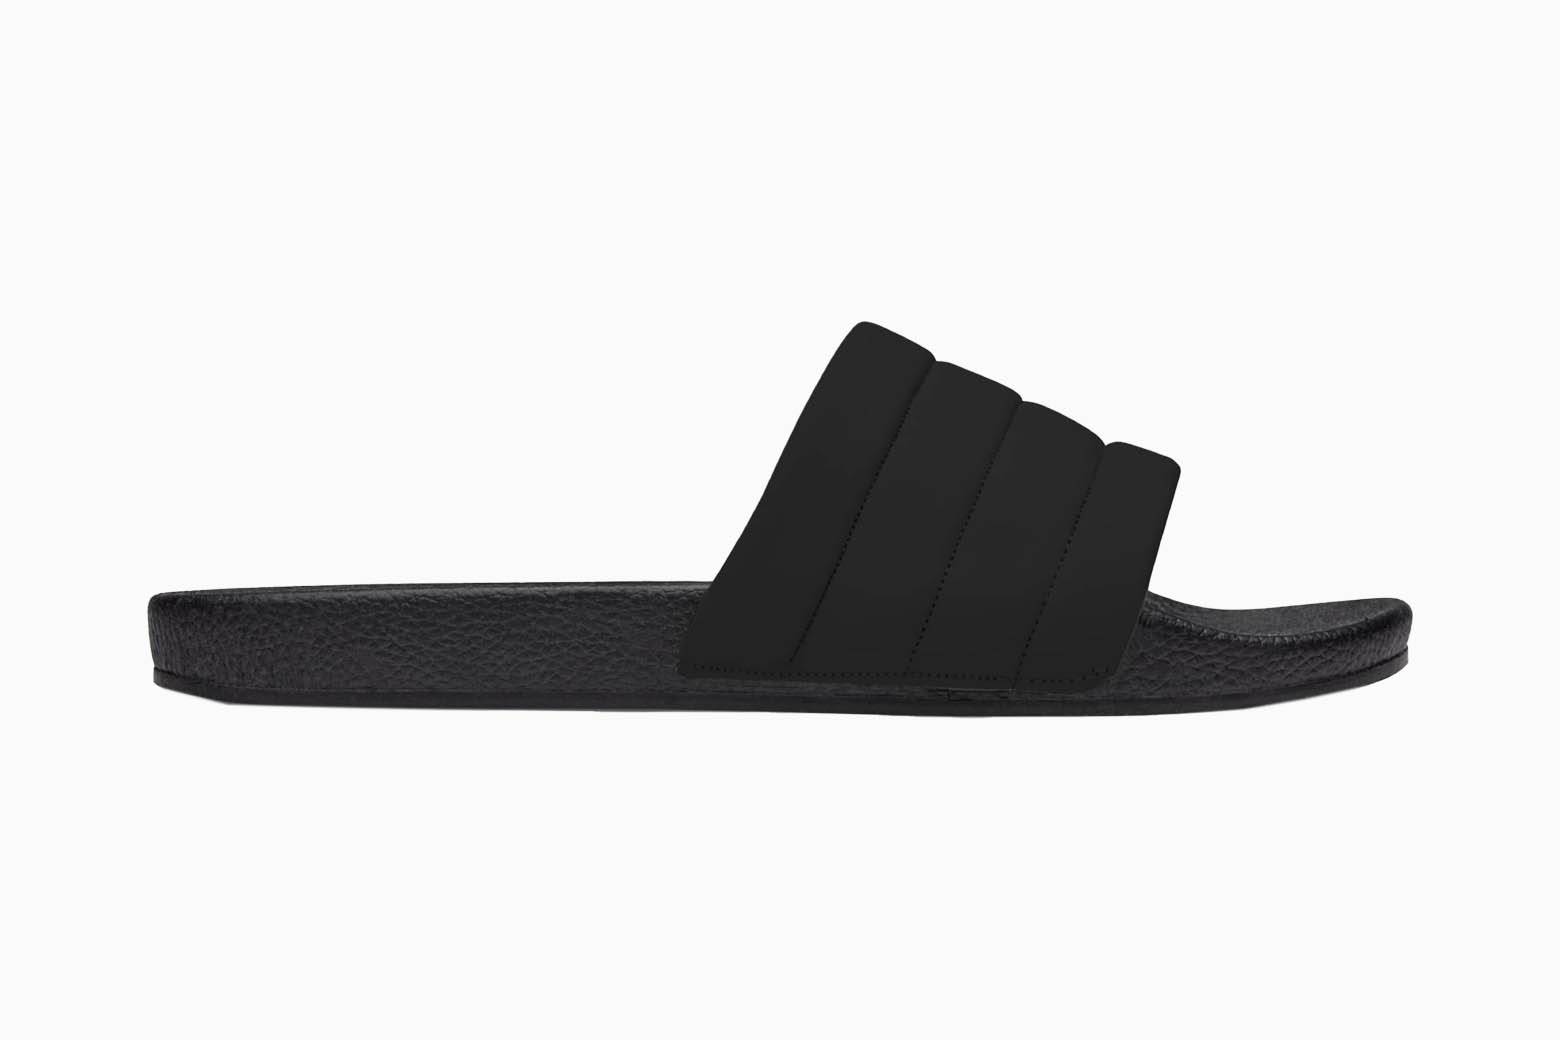 20 Best Slides For Women For Effortless Style (Buying Guide)